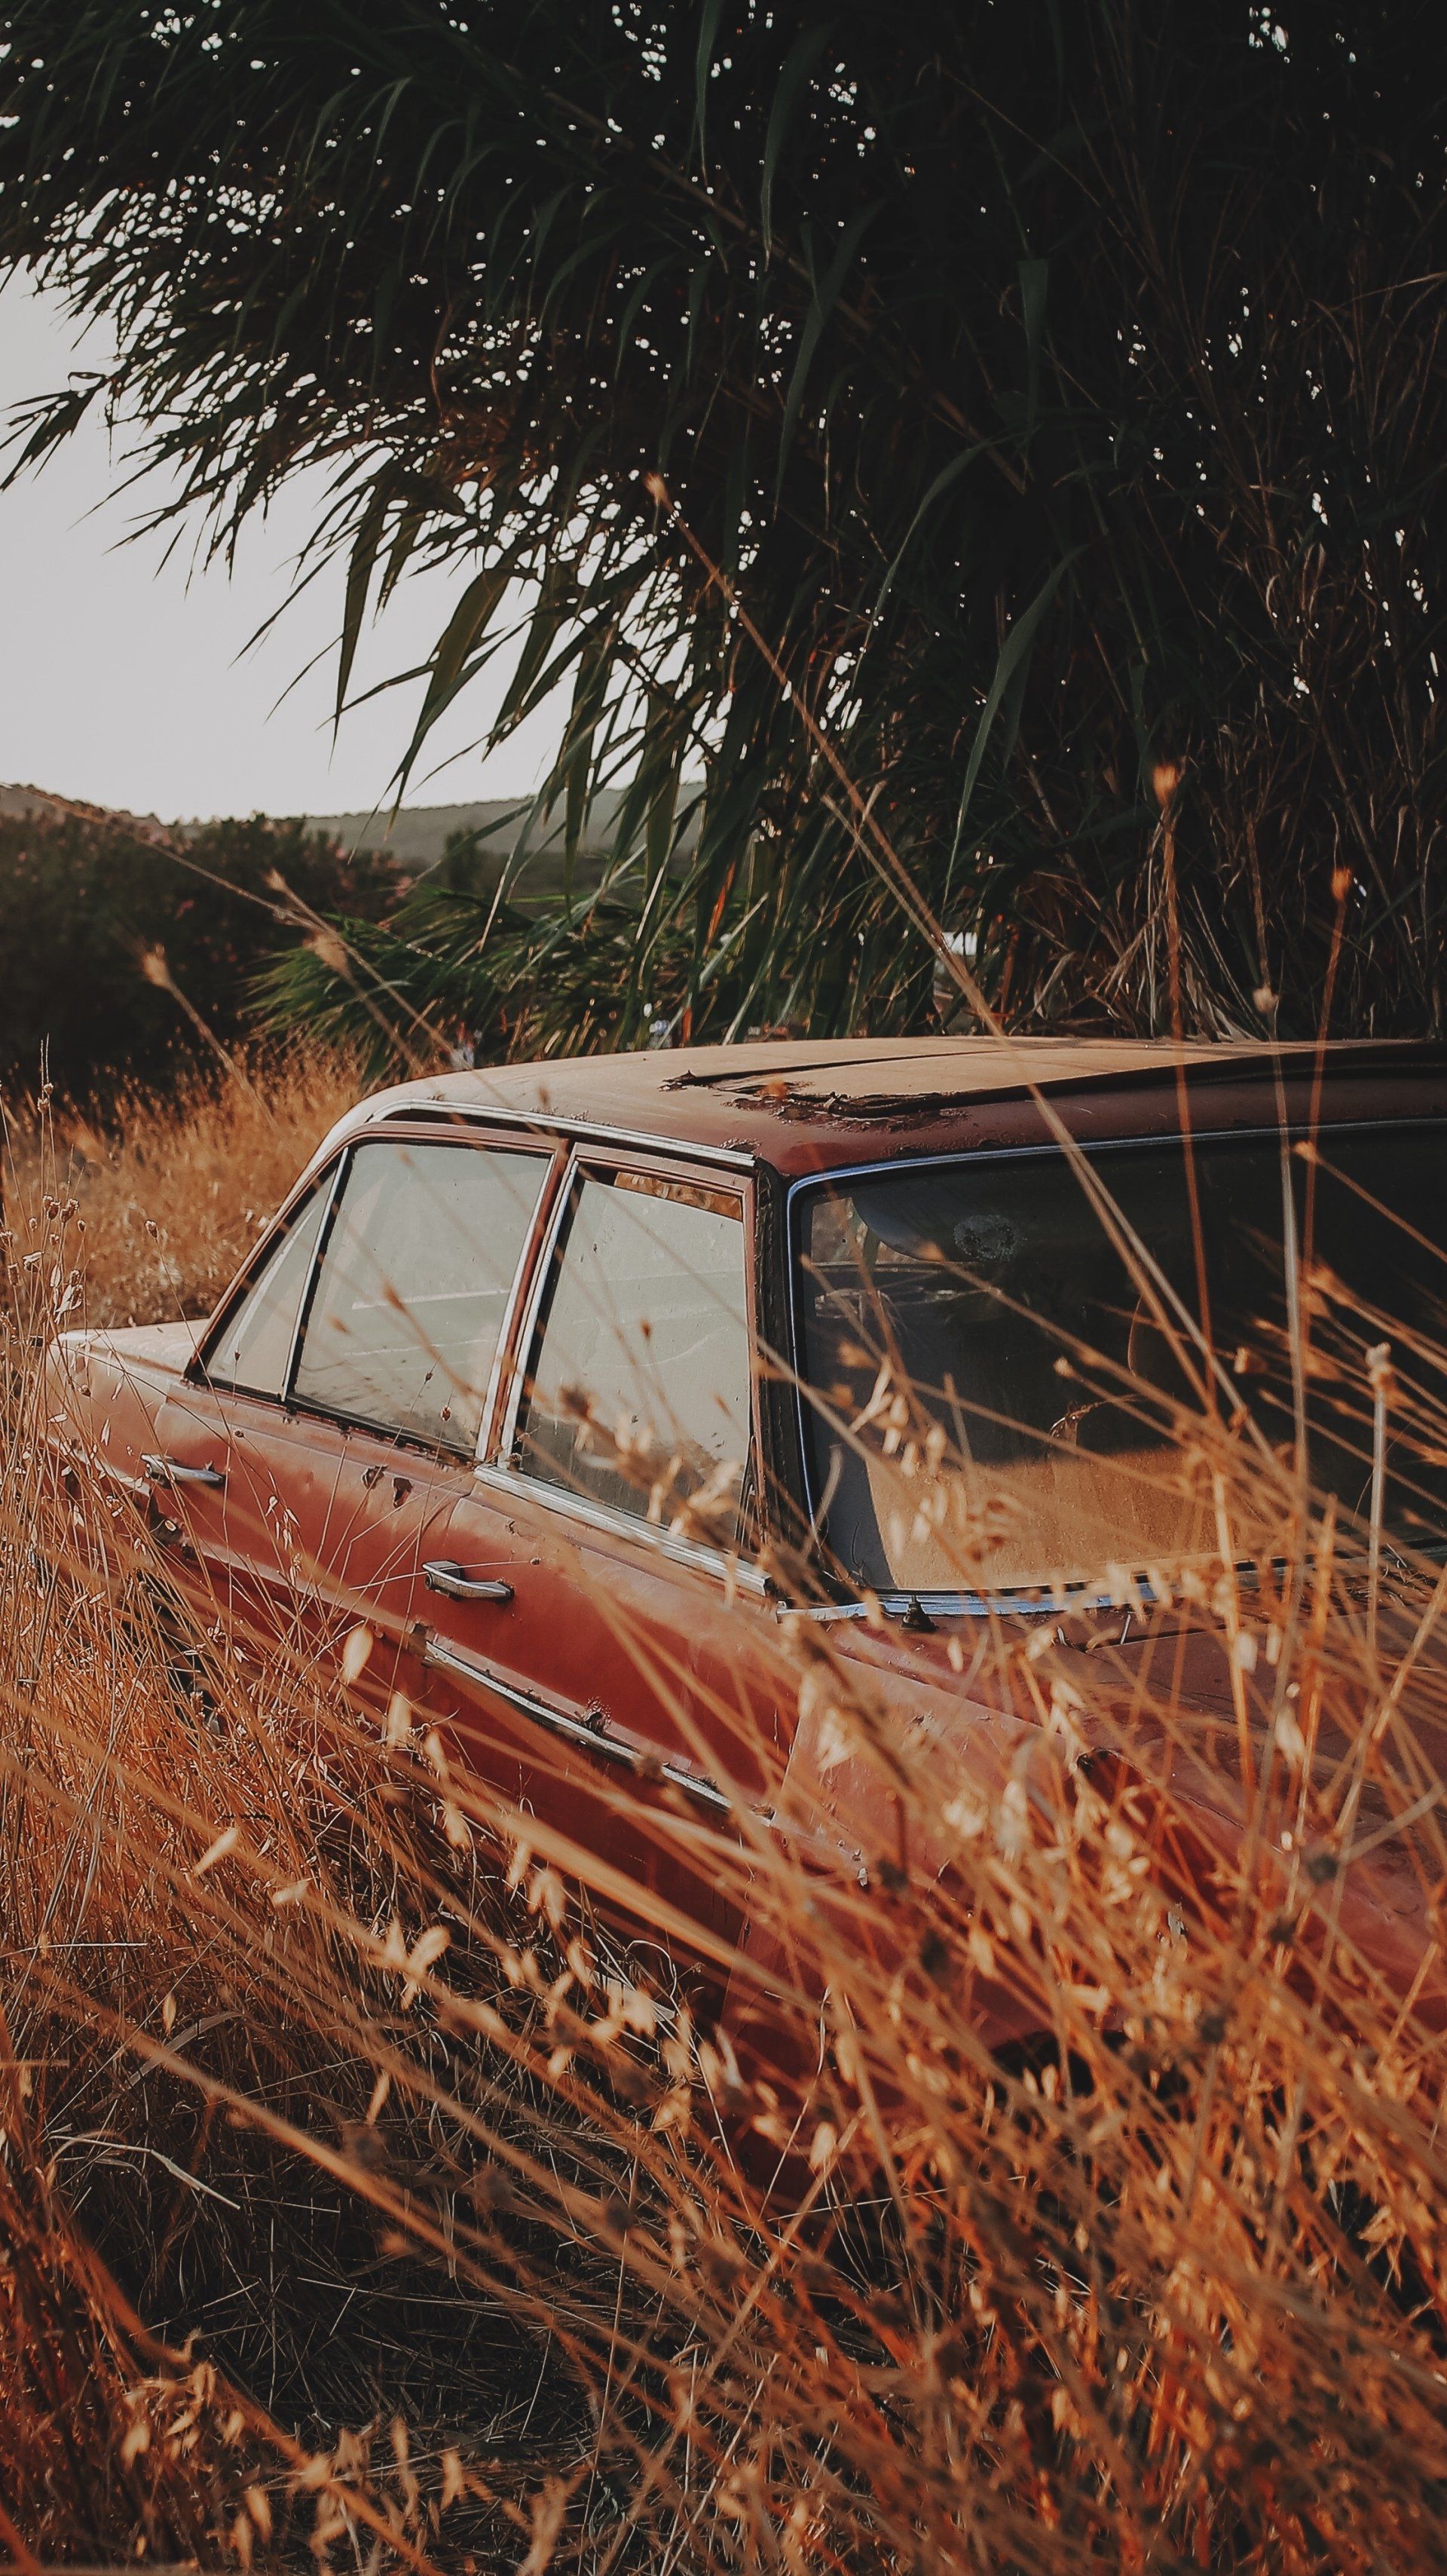 An old rusty car is sitting in a field of tall grass.